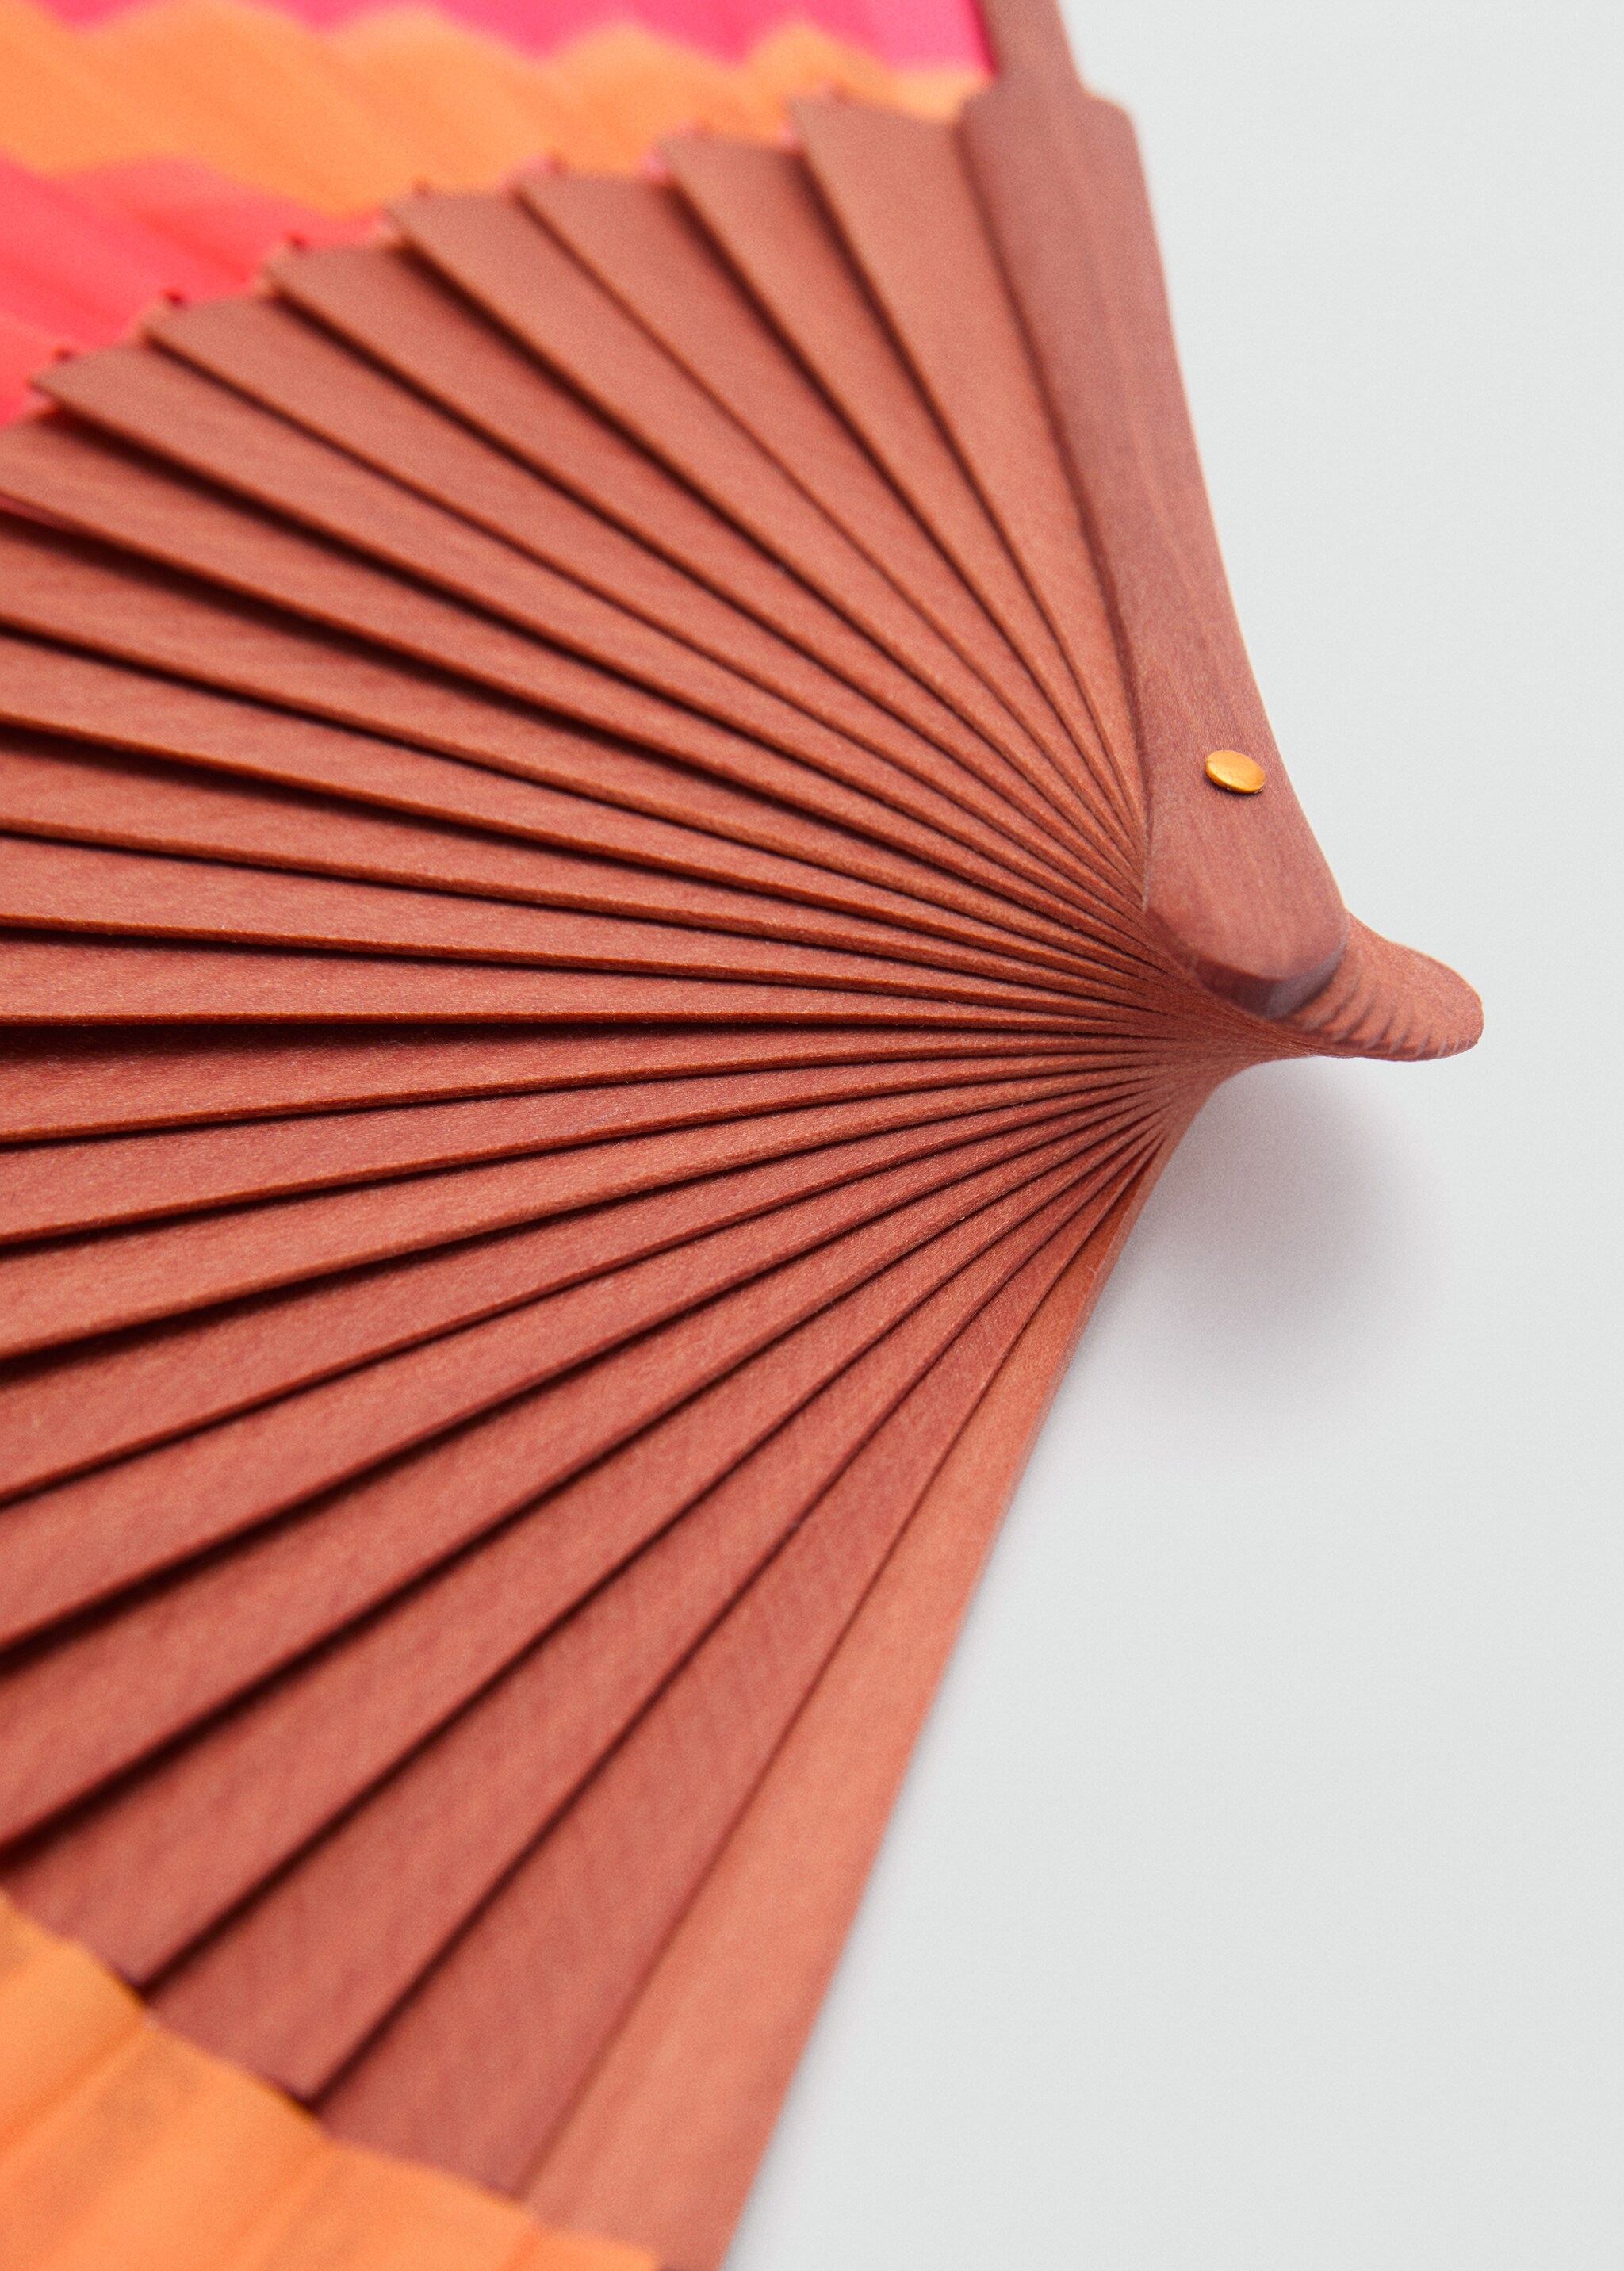 Wooden fan - Details of the article 1